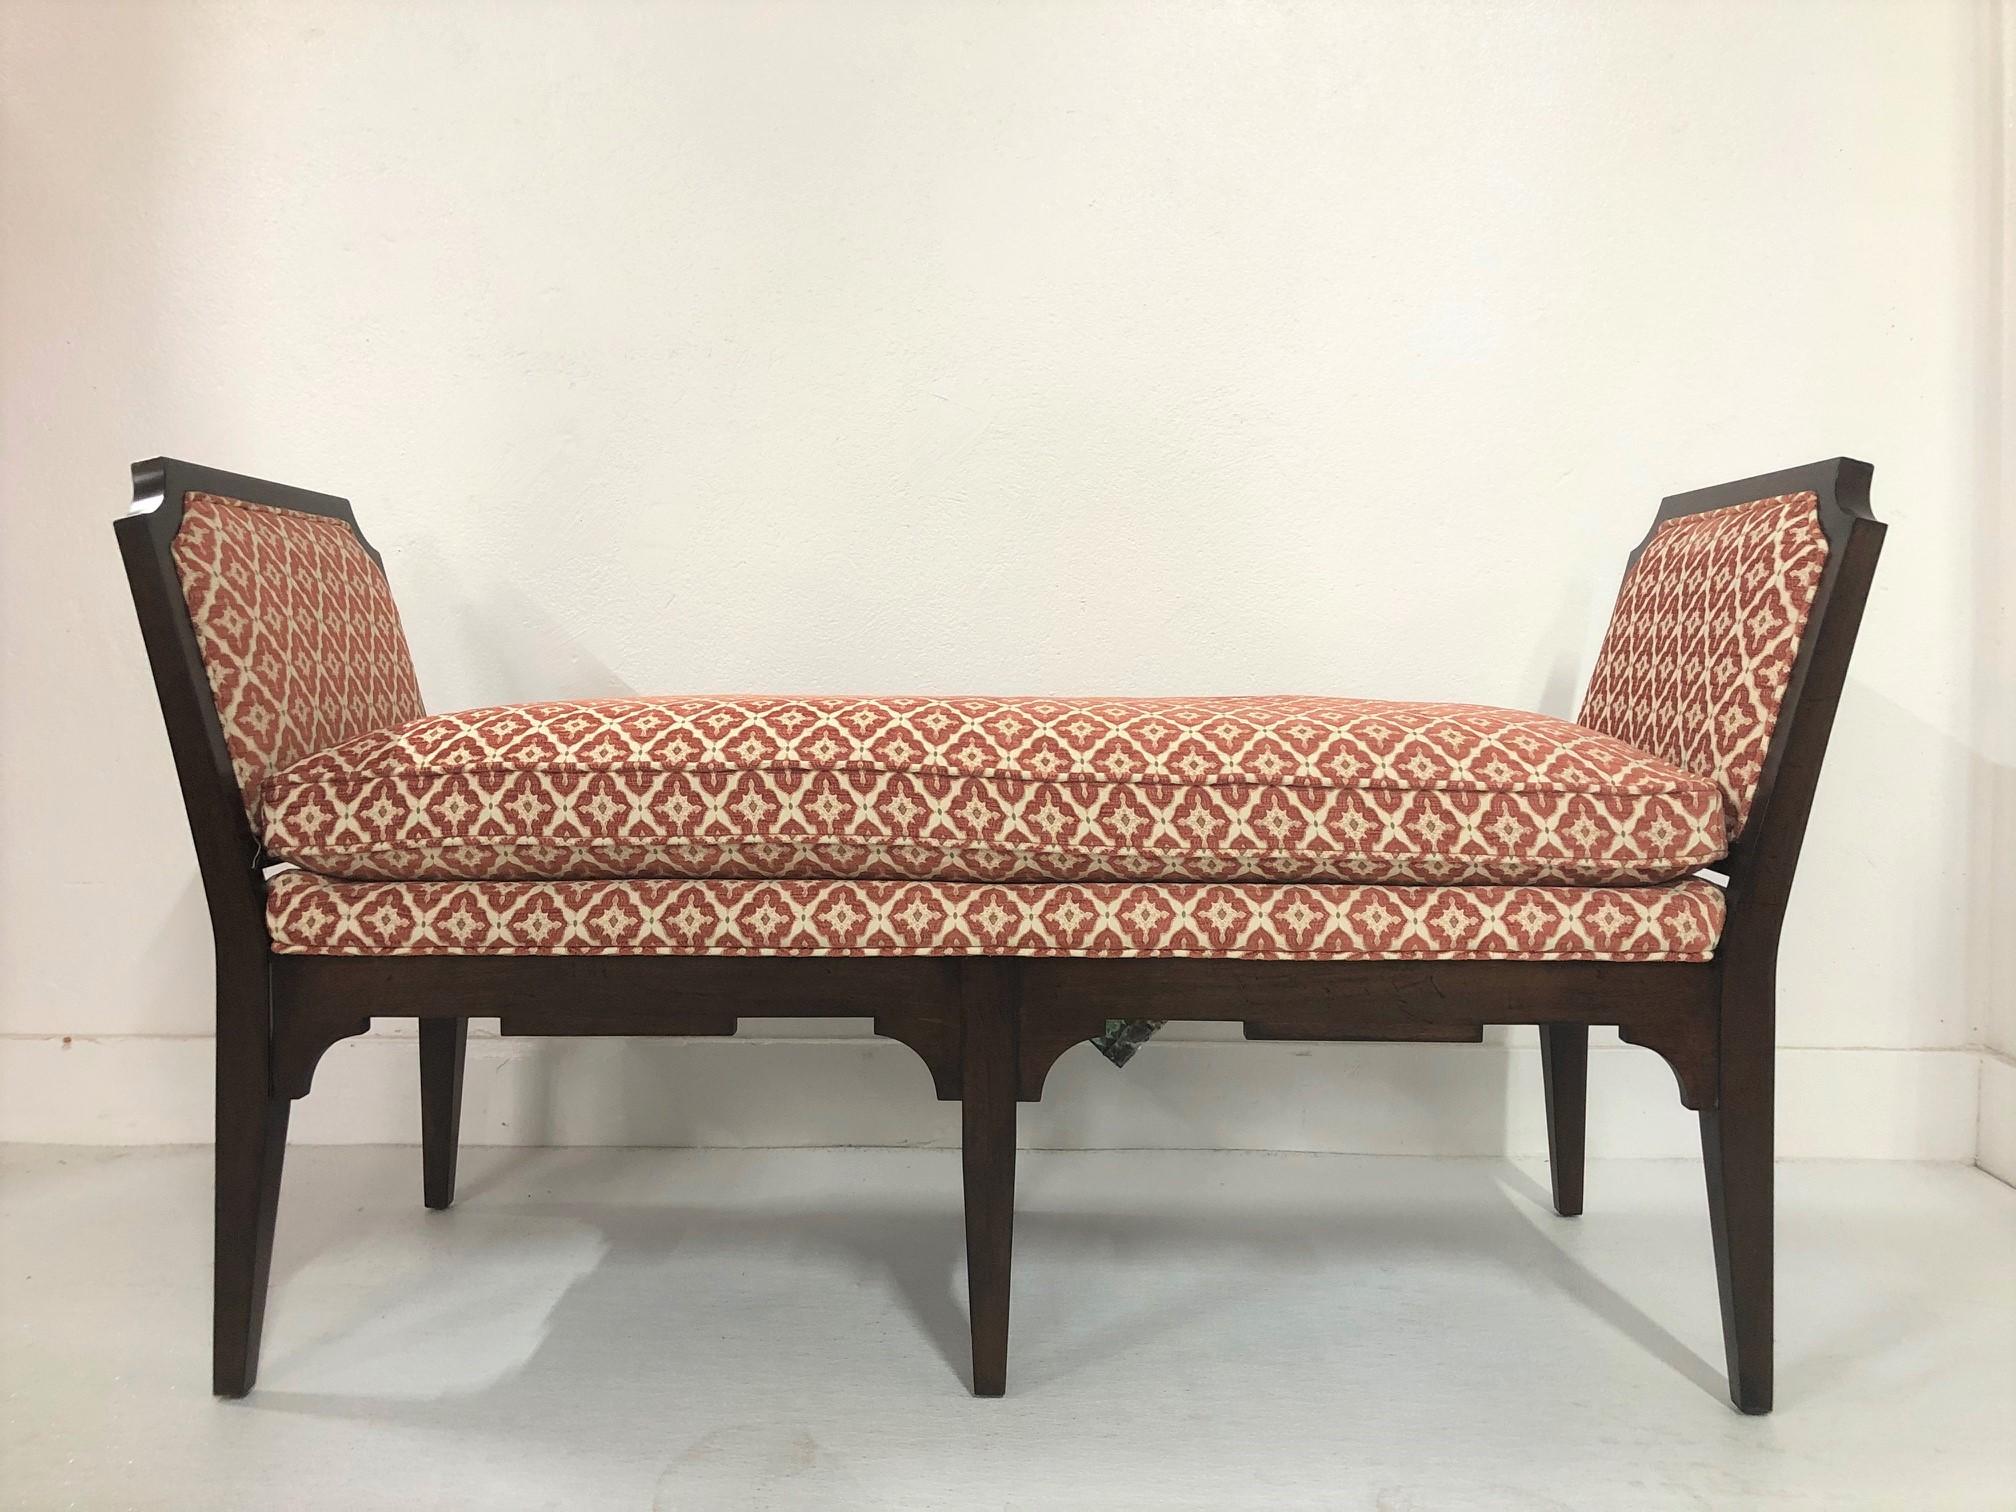 Antique style upholstered bench. Has an attached, down filled seat cushion, original upholstery, and a hard wood frame.